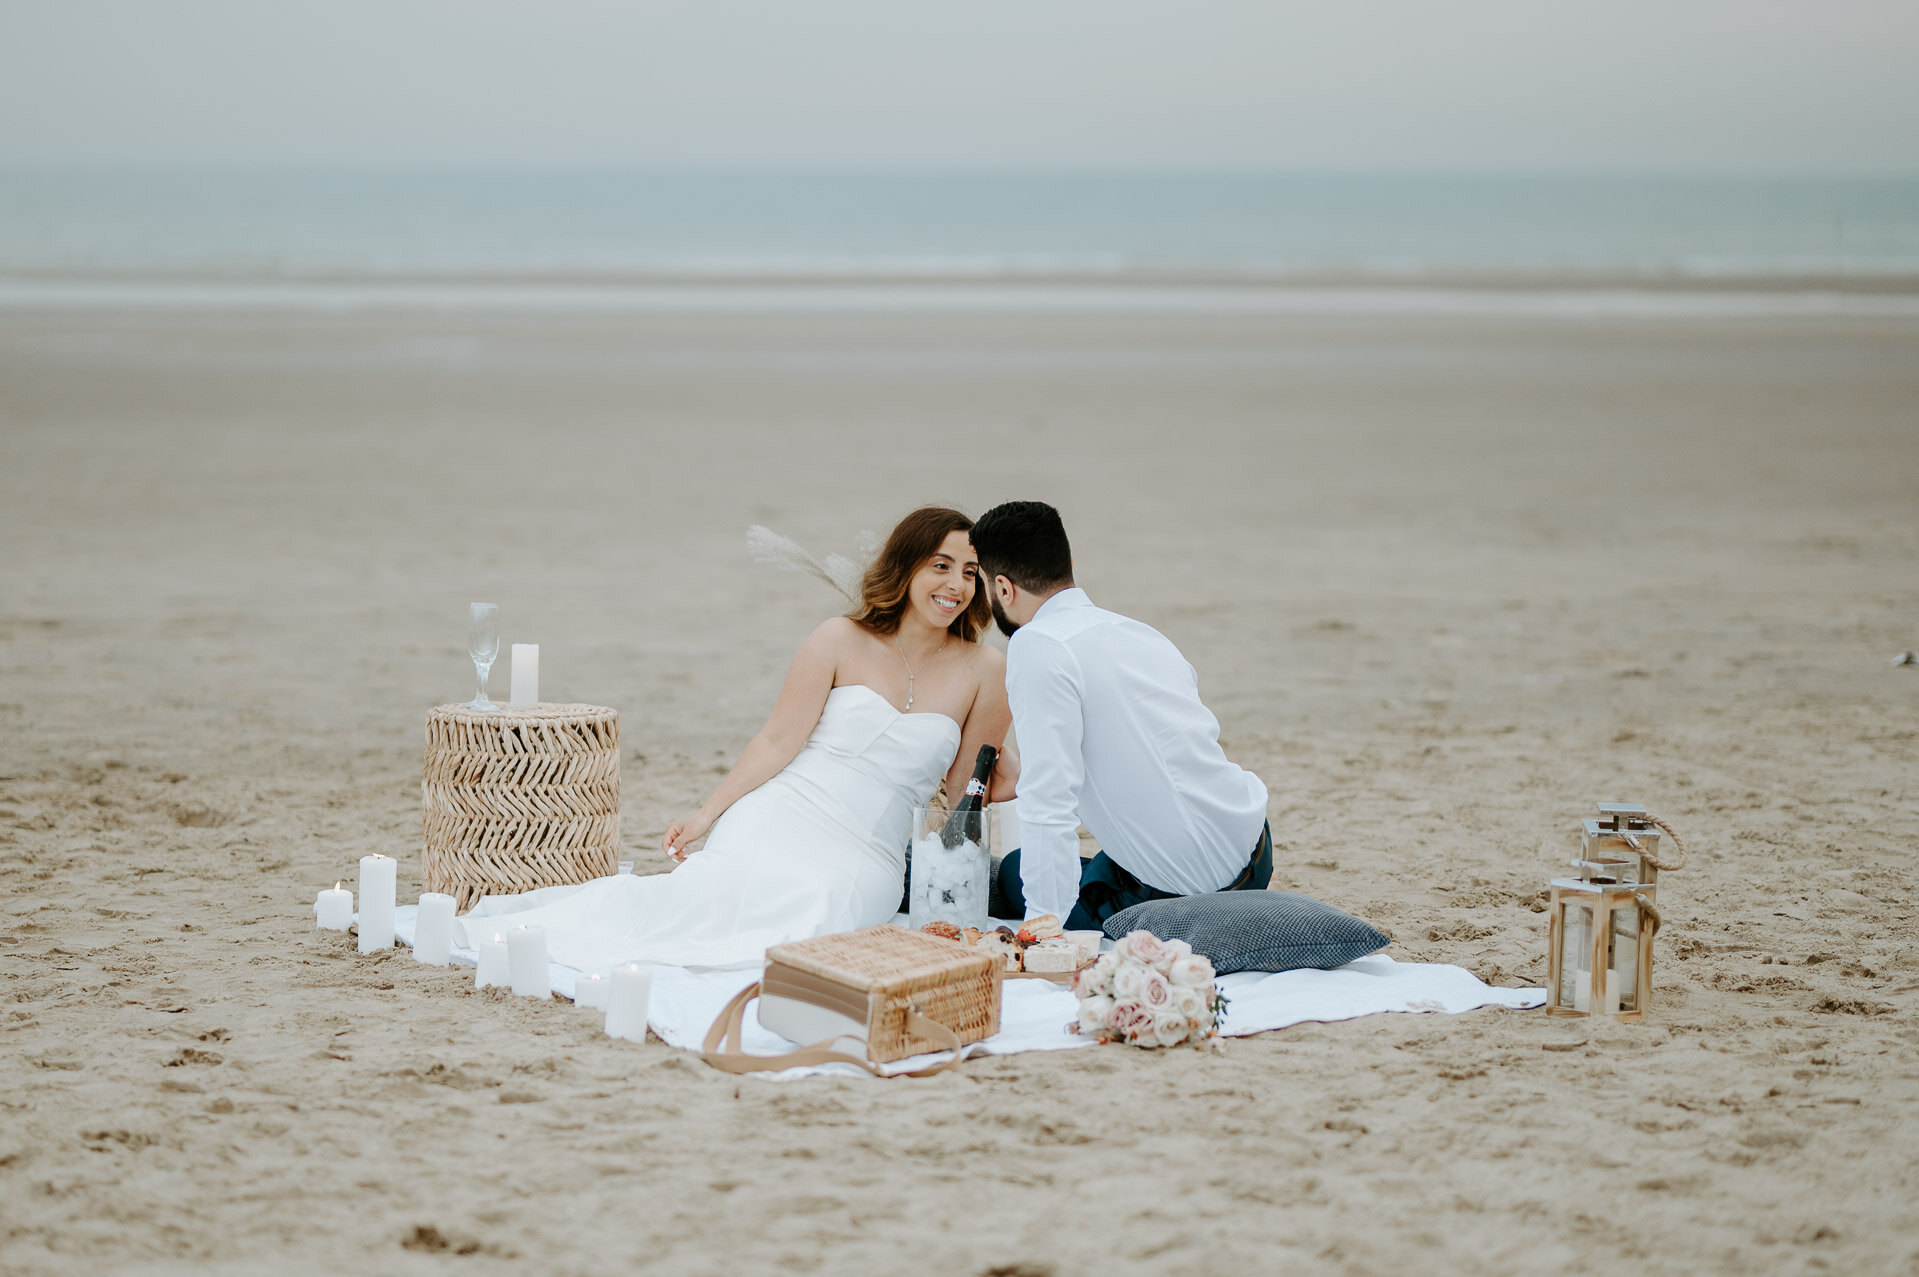 Demiana and Goergeuos - Camber Sands Golden Hour Beach Shoot - Laura Williams Photography-9.jpg